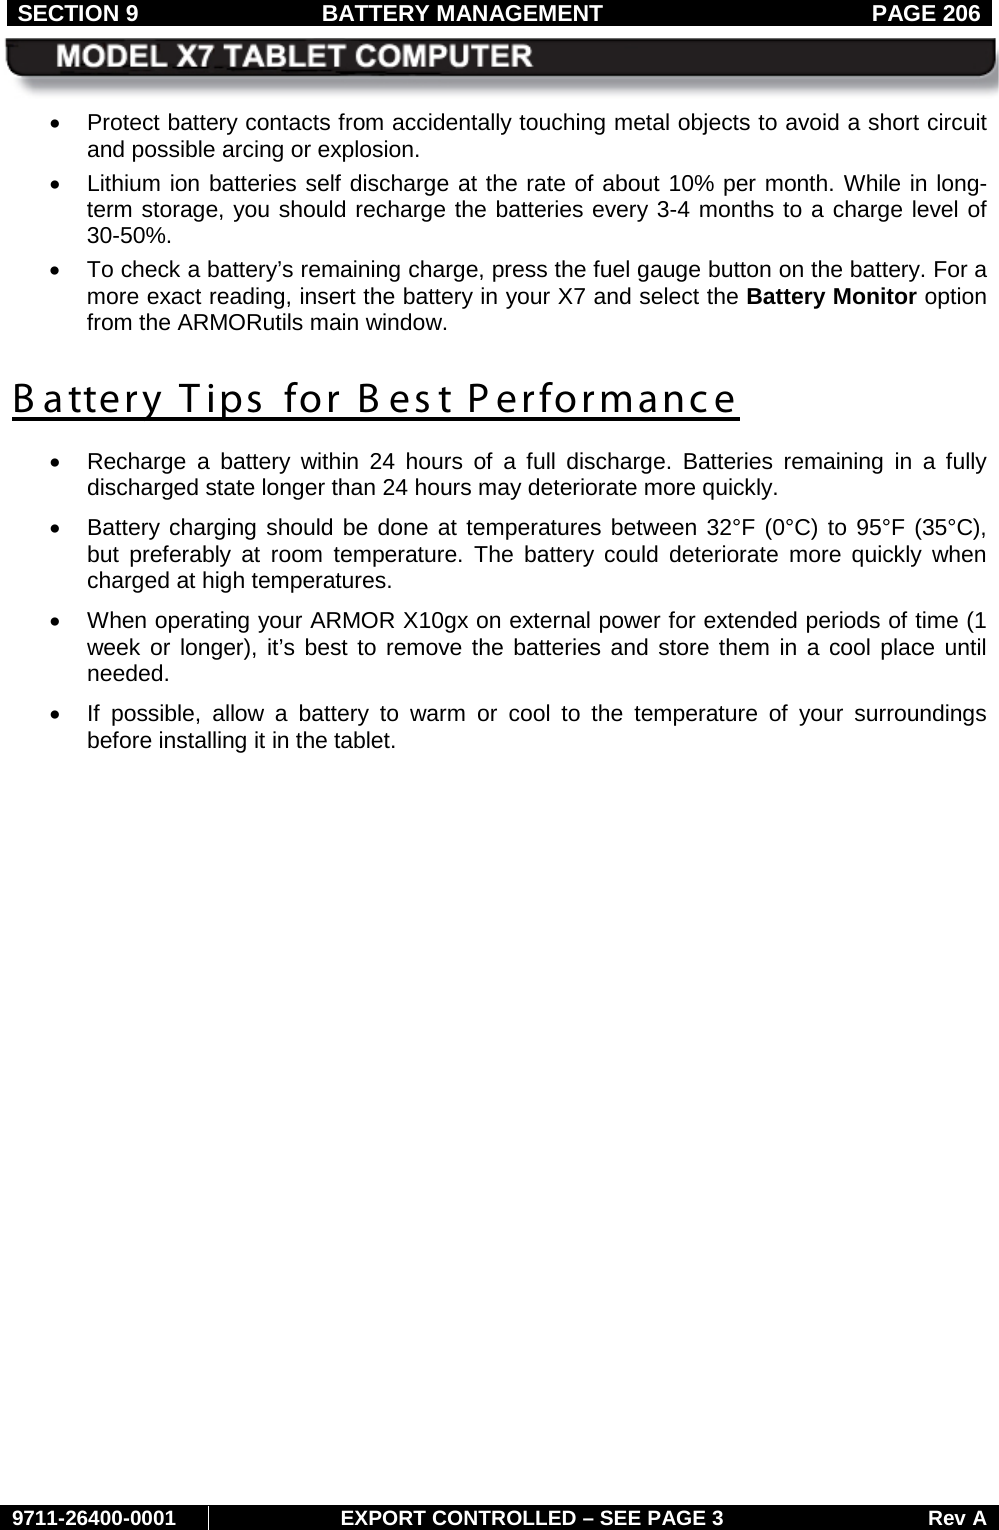 SECTION 9 BATTERY MANAGEMENT  PAGE 206     9711-26400-0001 EXPORT CONTROLLED – SEE PAGE 3 Rev A • Protect battery contacts from accidentally touching metal objects to avoid a short circuit and possible arcing or explosion. • Lithium ion batteries self discharge at the rate of about 10% per month. While in long-term storage, you should recharge the batteries every 3-4 months to a charge level of 30-50%.  •  To check a battery’s remaining charge, press the fuel gauge button on the battery. For a more exact reading, insert the battery in your X7 and select the Battery Monitor option from the ARMORutils main window. B attery Tips for Best Performance • Recharge  a  battery  within 24 hours of a full discharge. Batteries remaining in a fully discharged state longer than 24 hours may deteriorate more quickly.  • Battery charging should be done at temperatures between 32°F (0°C) to 95°F (35°C), but preferably at room temperature. The battery could deteriorate more quickly when charged at high temperatures. • When operating your ARMOR X10gx on external power for extended periods of time (1 week or longer), it’s best to remove the batteries and store them in a cool place until needed.  • If possible, allow a battery to warm or cool to the temperature of your surroundings before installing it in the tablet.   